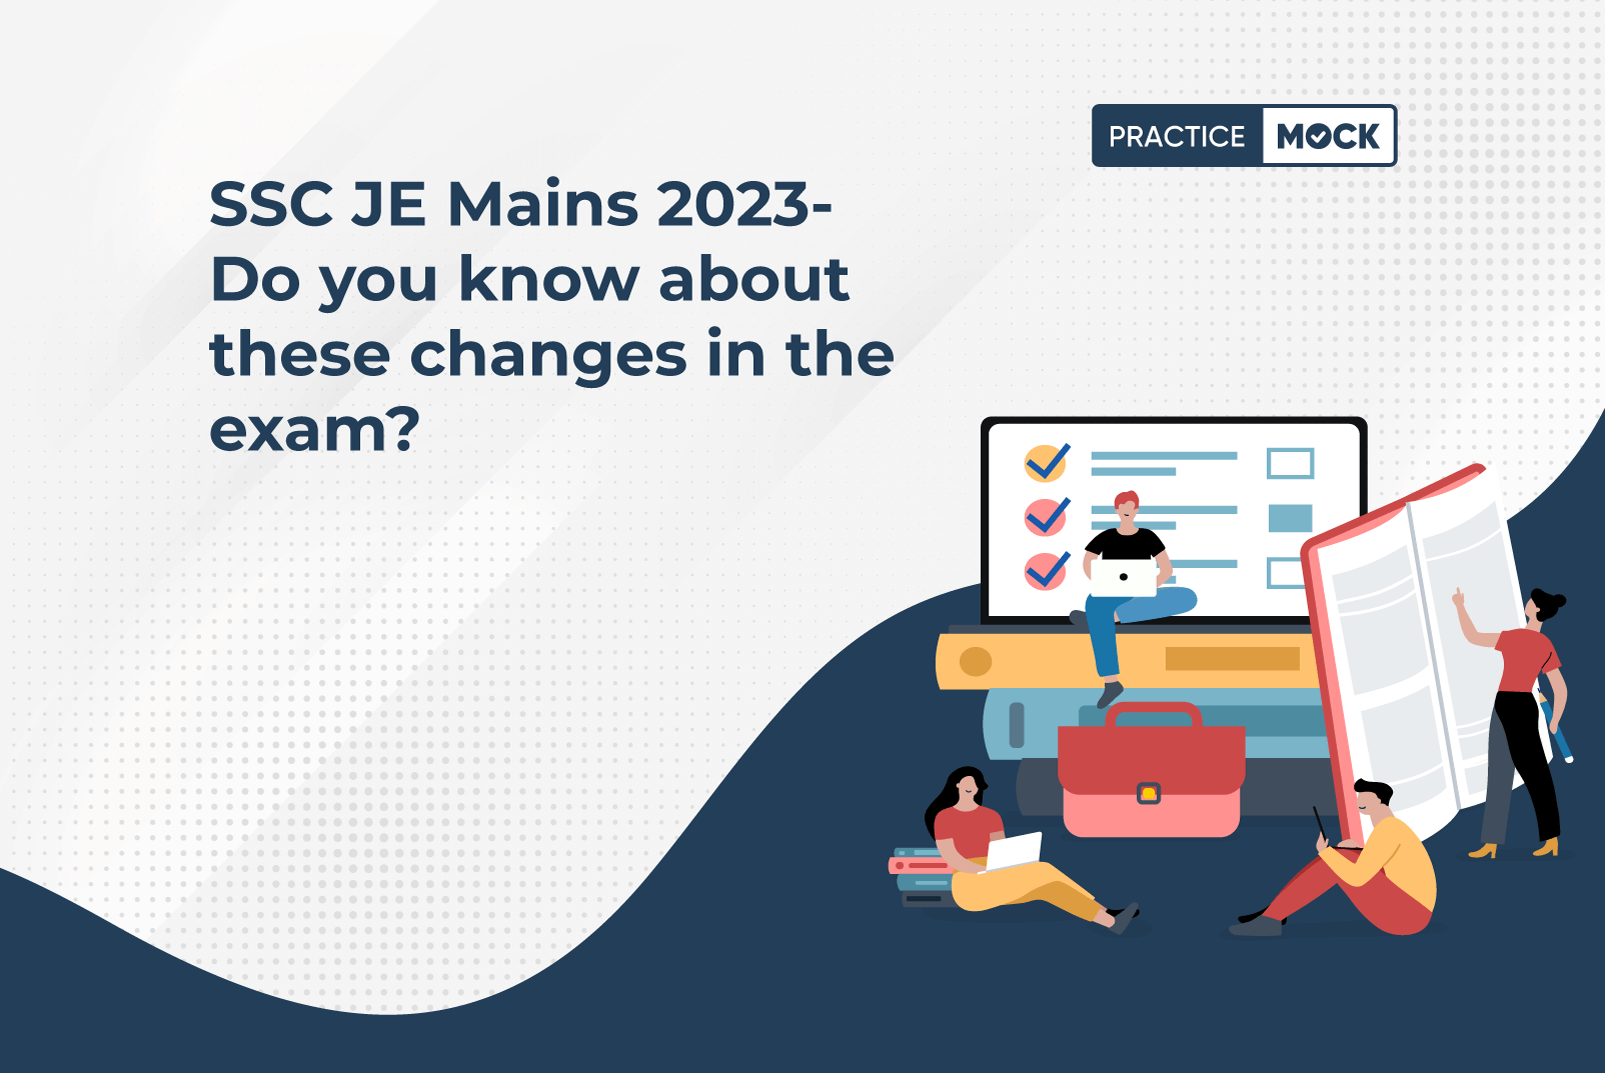 SSC JE Mains 2023: SSC Introduces On-Screen Scientific Calculator, Check Details